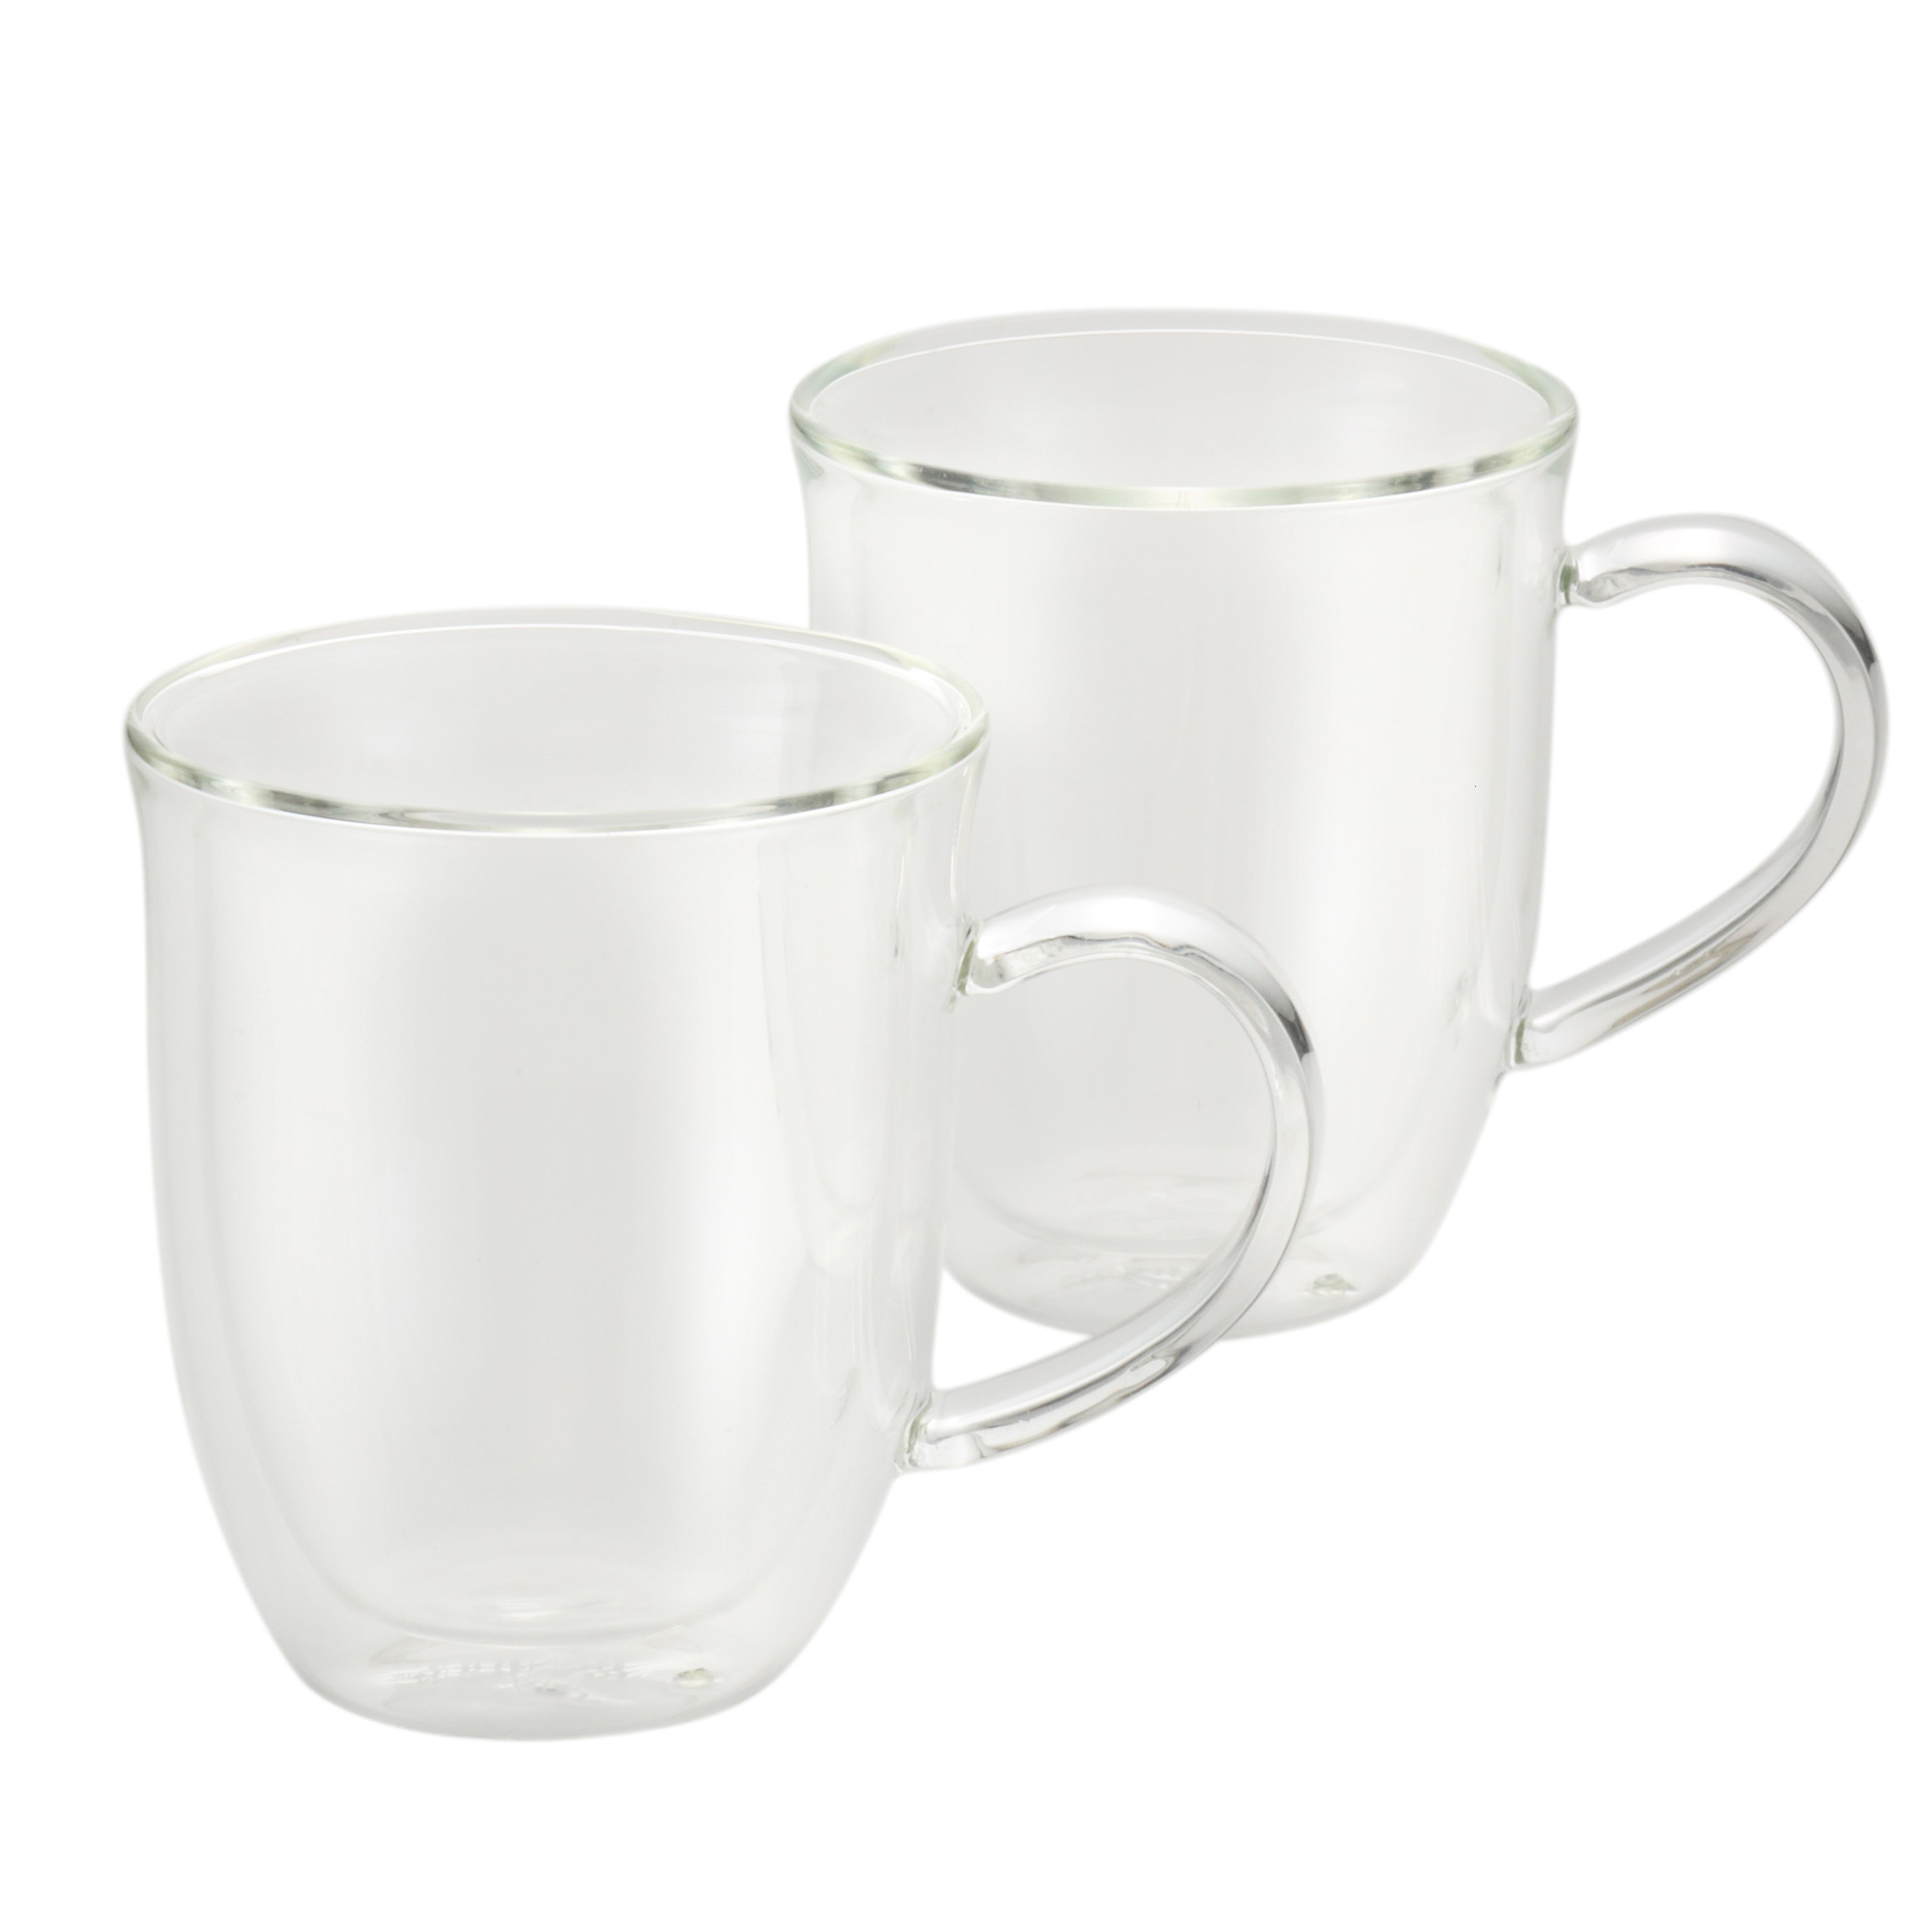 Homvare Coffee Mugs, Double Walled Borosilicate Glass Insulated Mug Set  with Handle Suitable for Both Hot and Cold Beverage, 12 oz - 2 Pack 